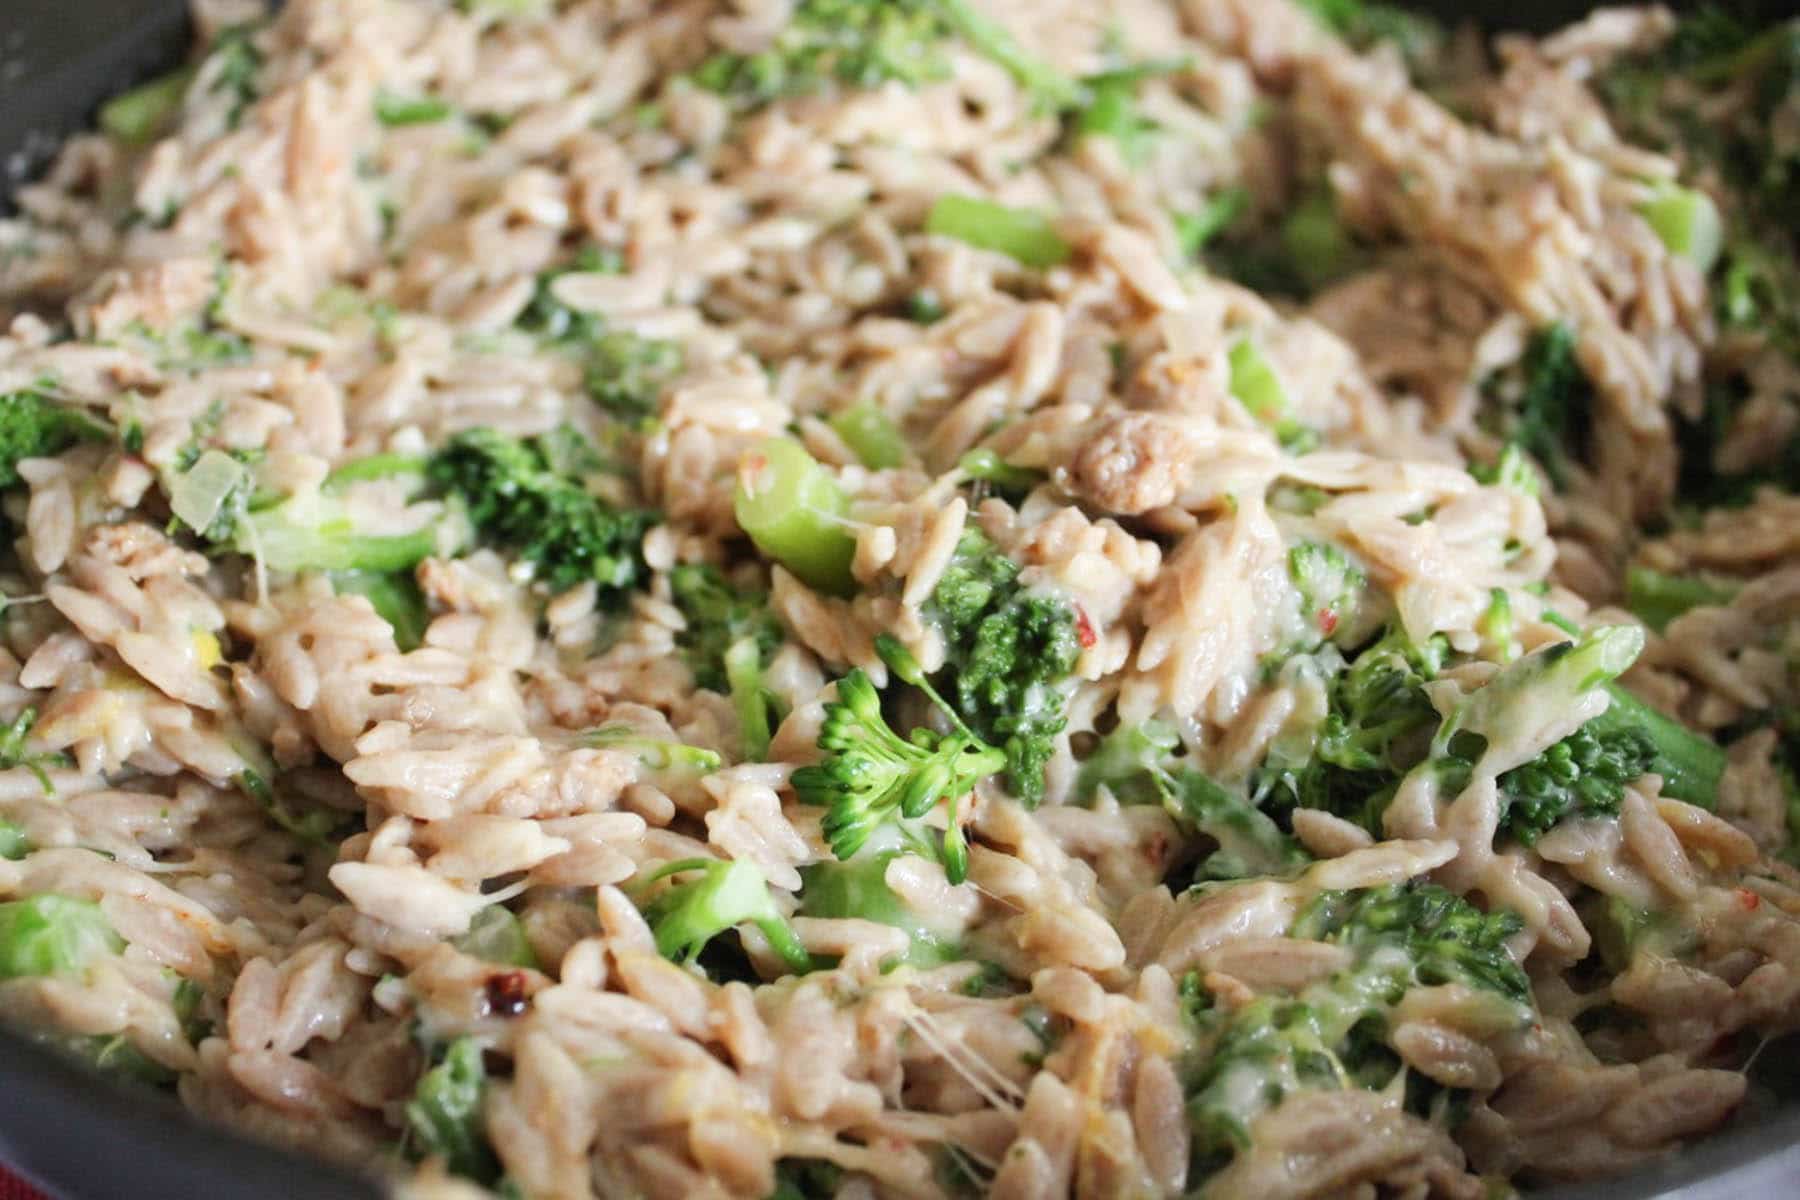 baked-orzo-casserole-with-turkey-sausage-broccolini-fontina-step-10